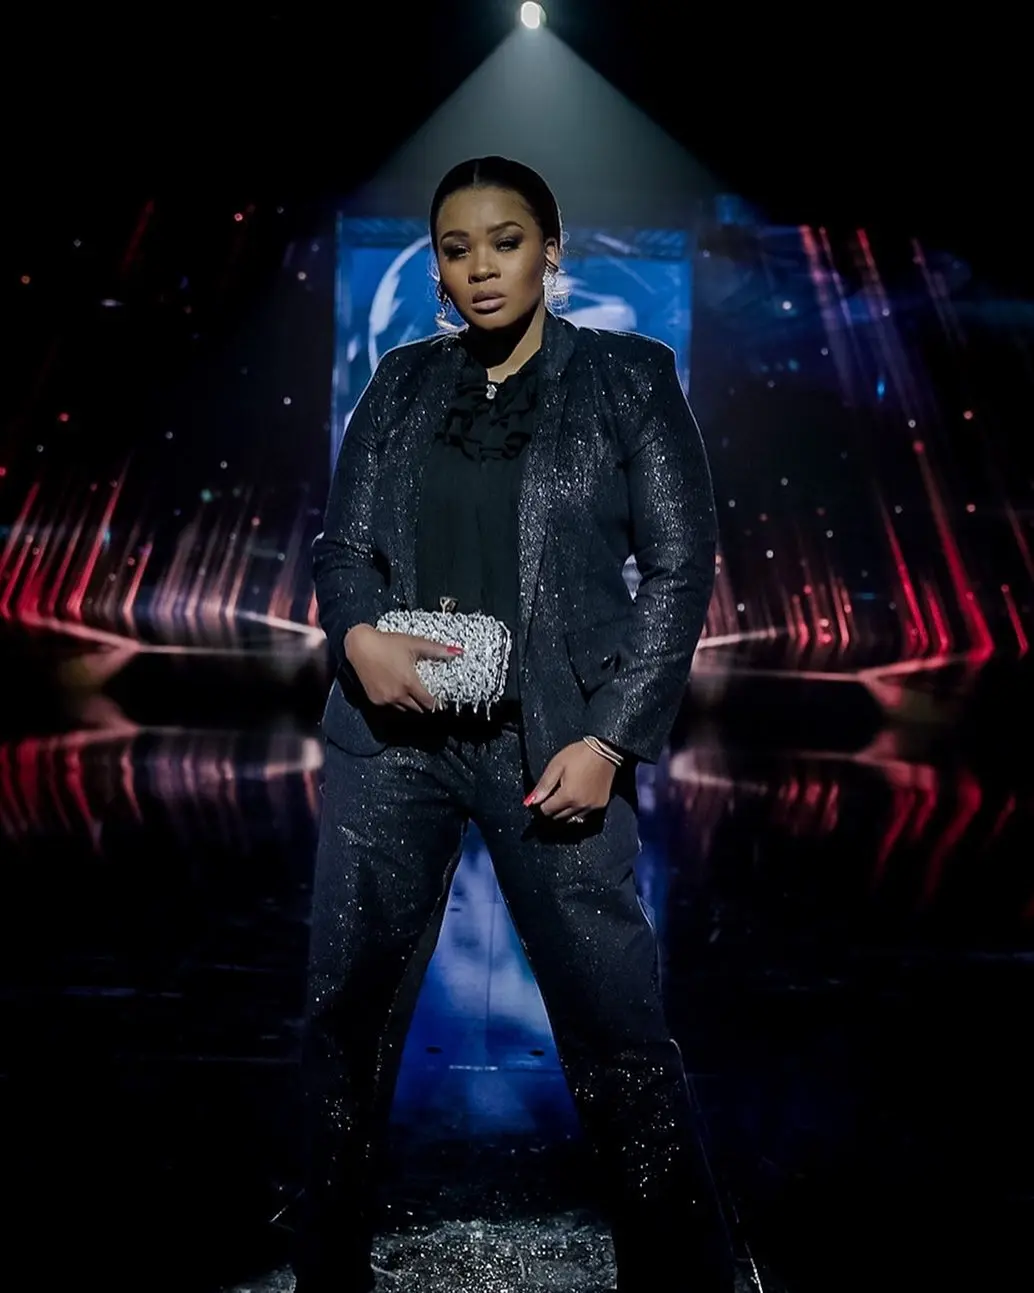 WATCH: Lady Du’s embarrassing stage performance